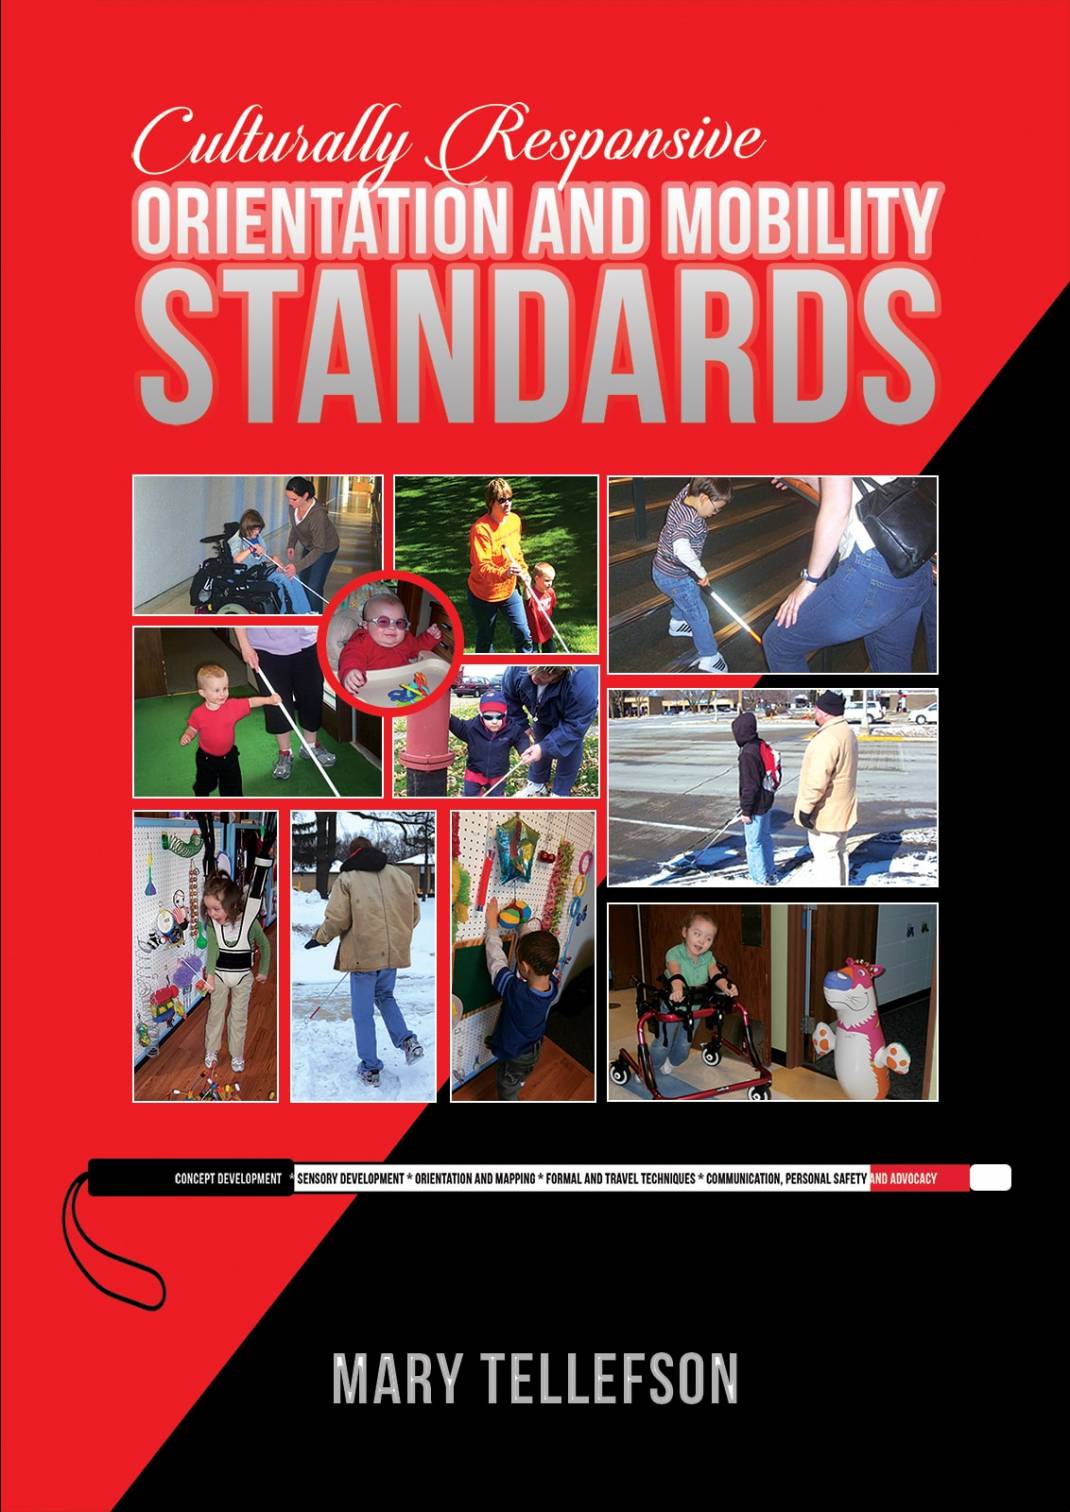 Cover of the O&M book Orientation and Mobility Standards